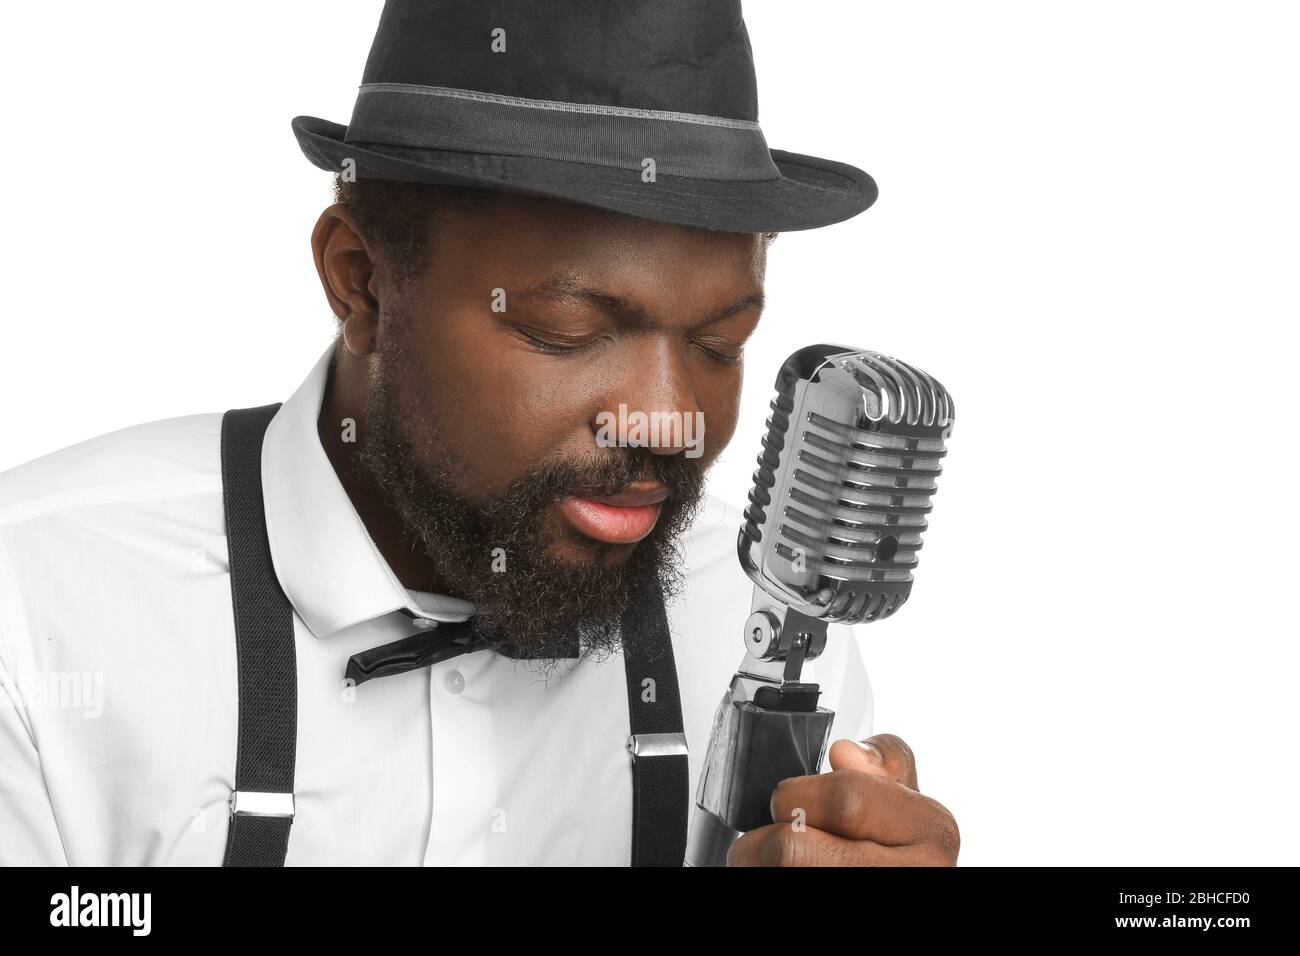 Male African-American singer on white background Stock Photo